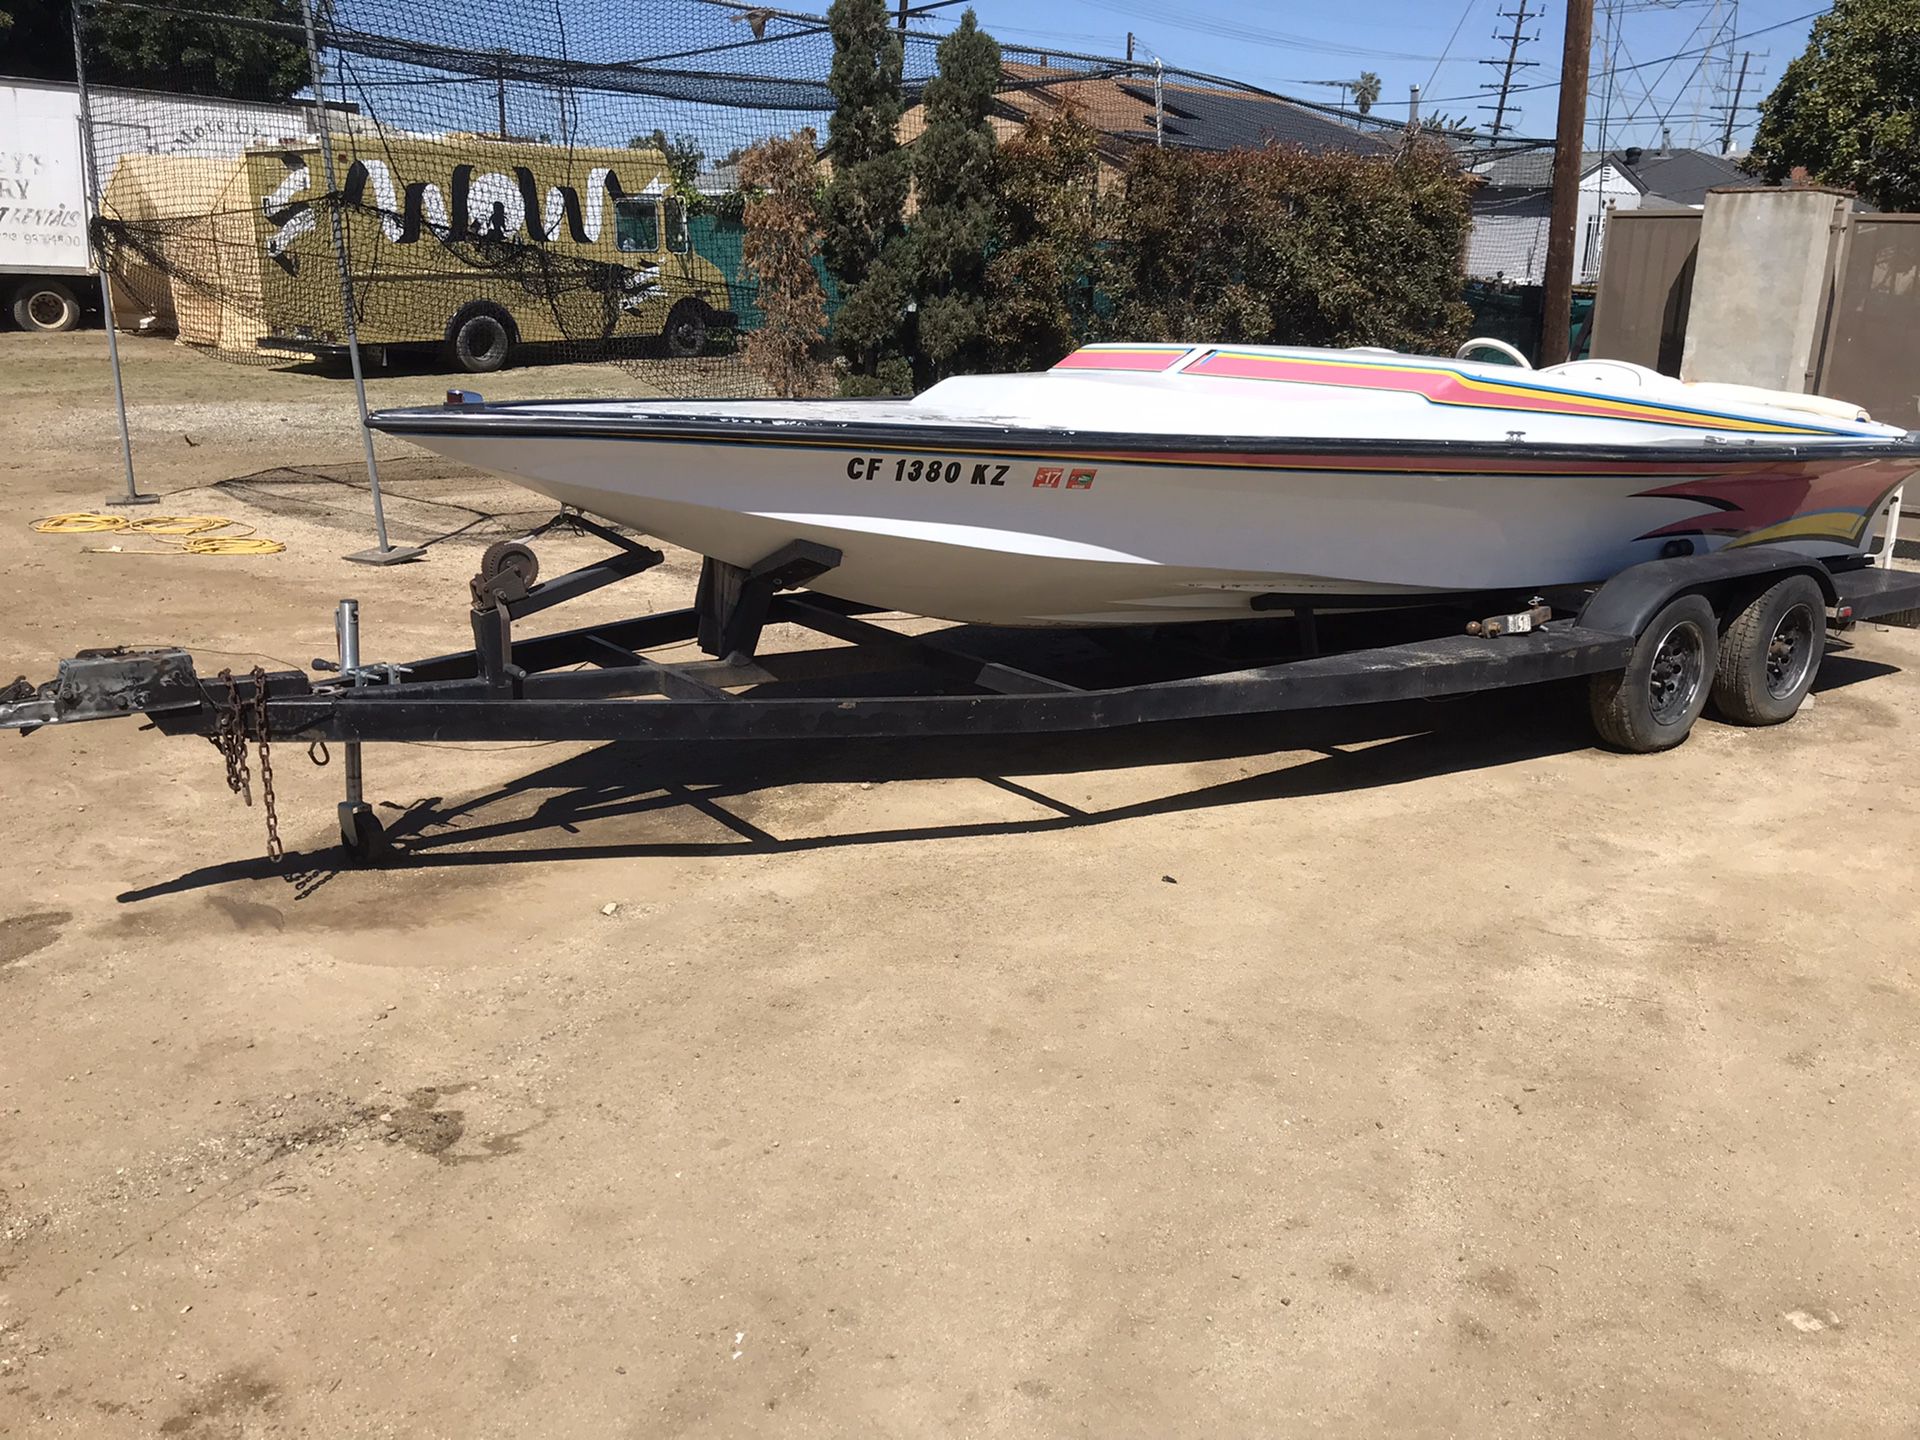 1973 Cheetah jet boat 21ft open to trades